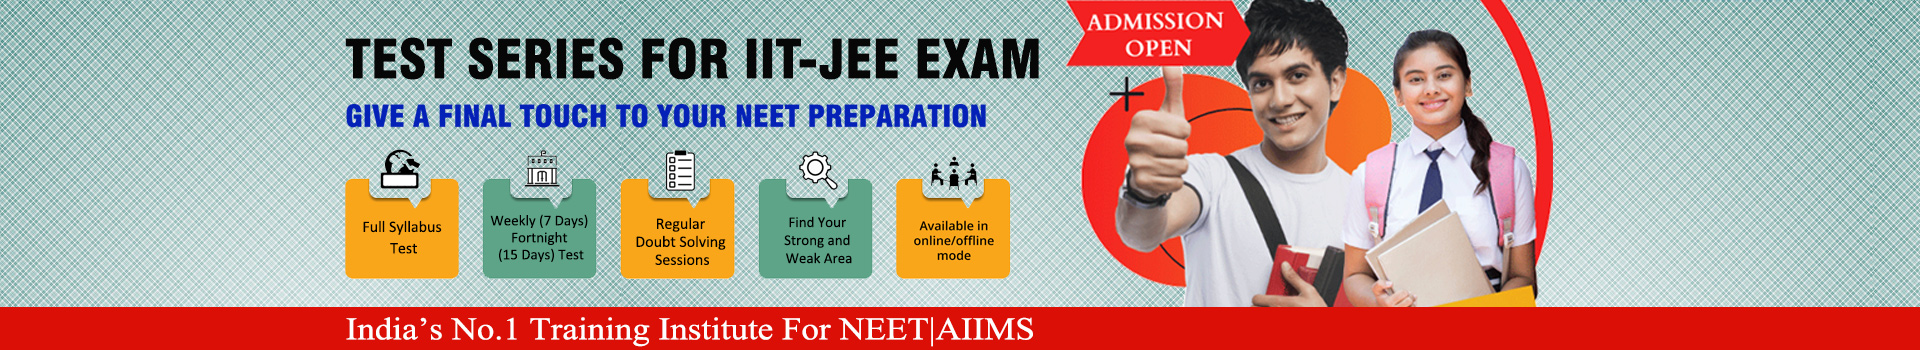 Online Test Series for IIT-JEE Main|Advanced